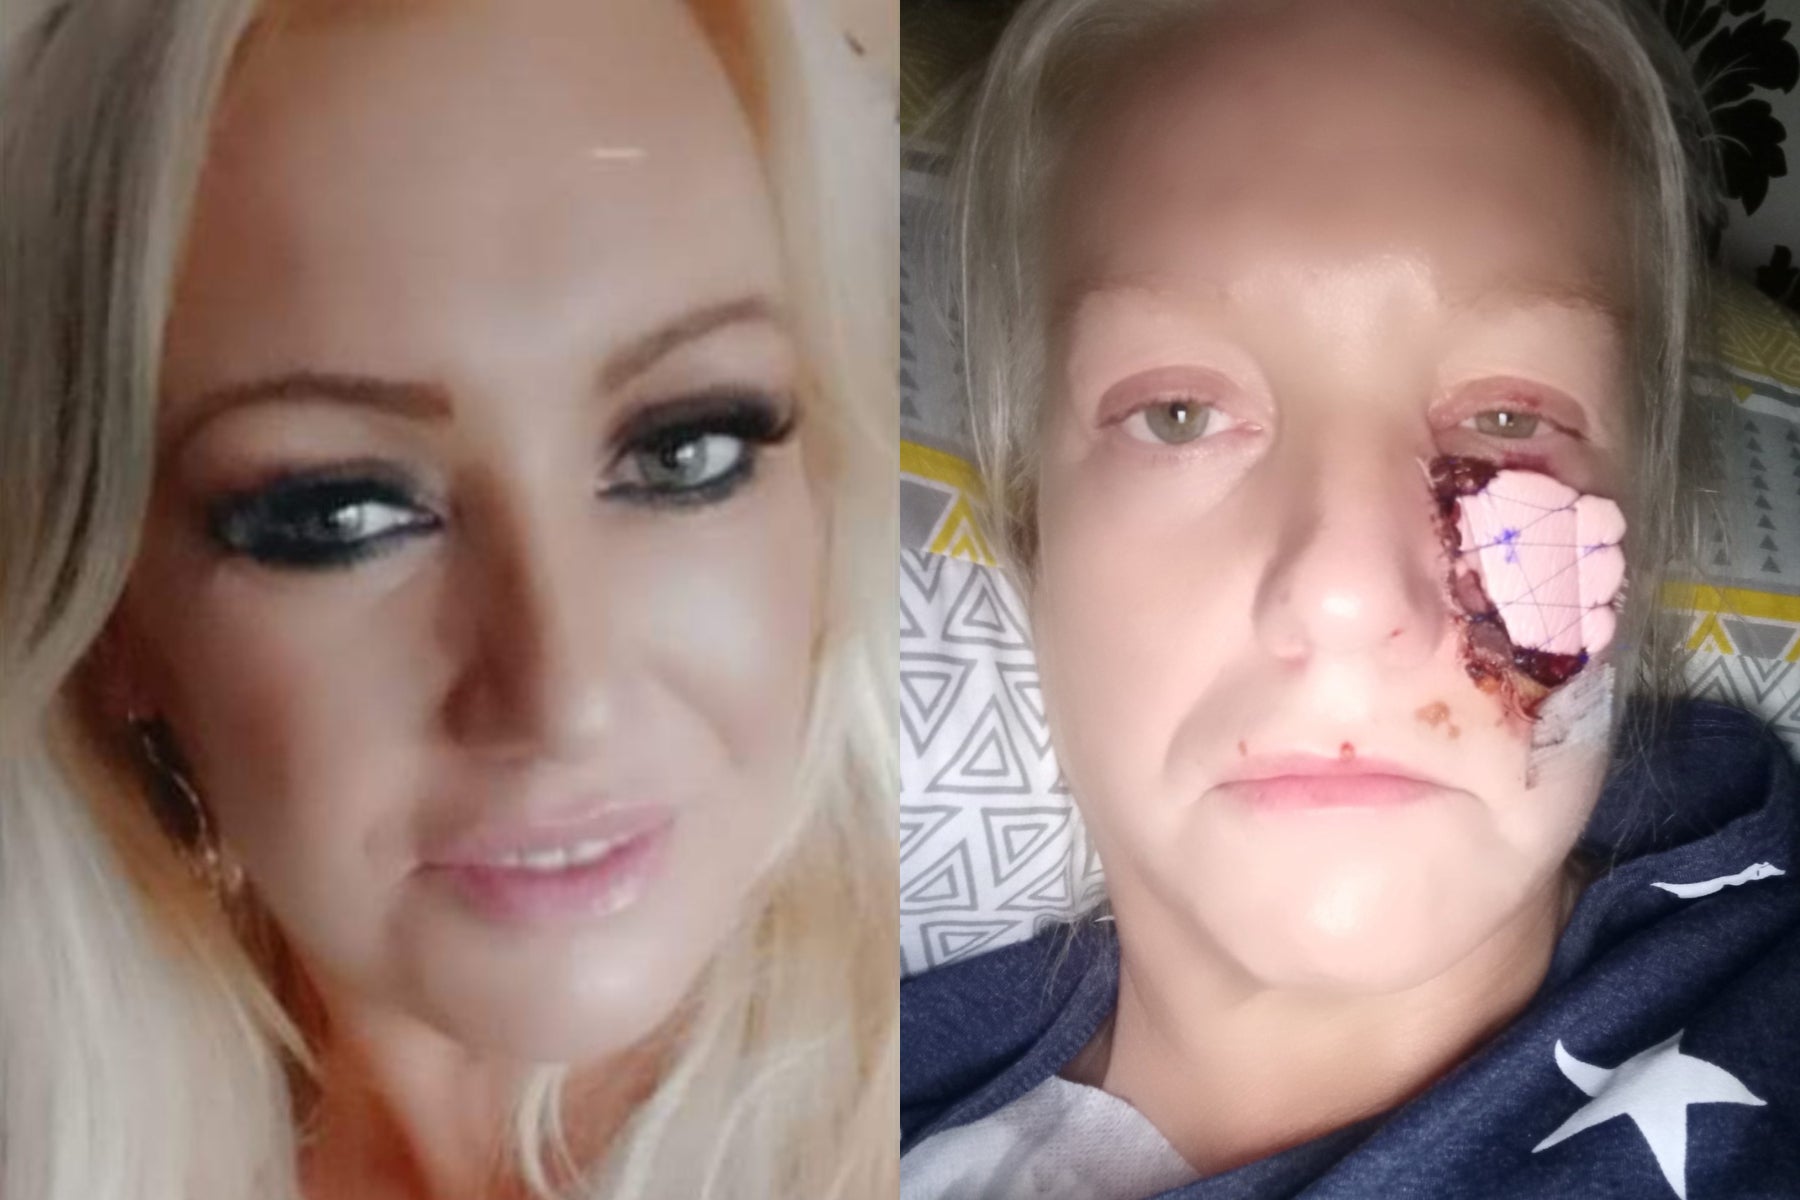 Kelly Allen, 45, from Swansea, had part of her cheek ripped off when she was attacked without warning by a friend's pet dachshund (Collect/PA Real Life)